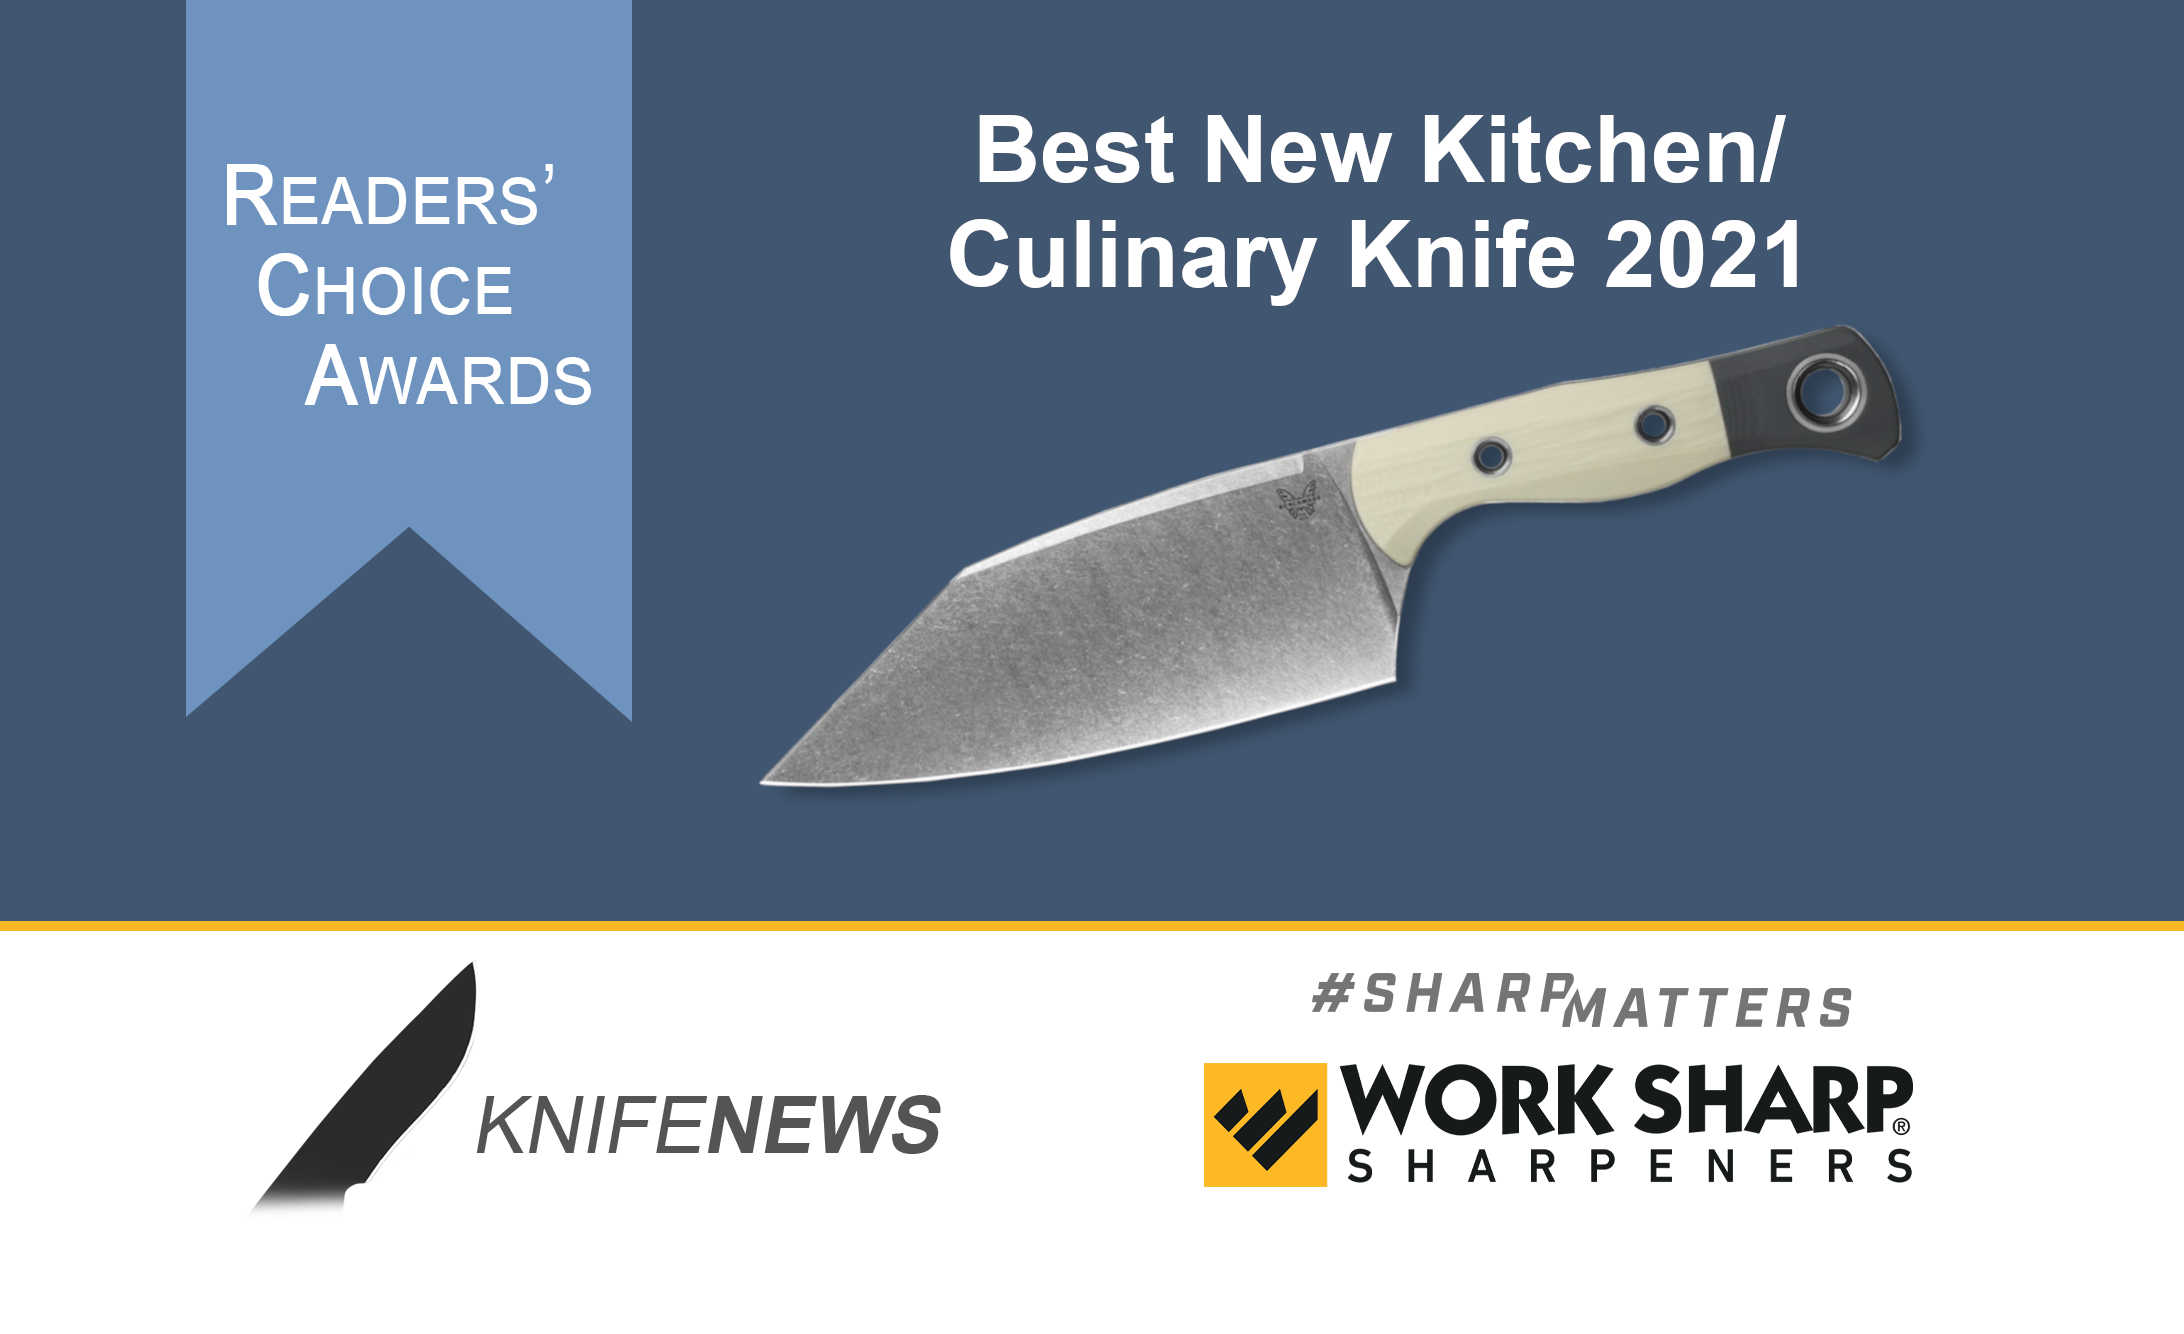 Benchmade Station Knife Voted Best New Kitchen/Culinary Knife 2021